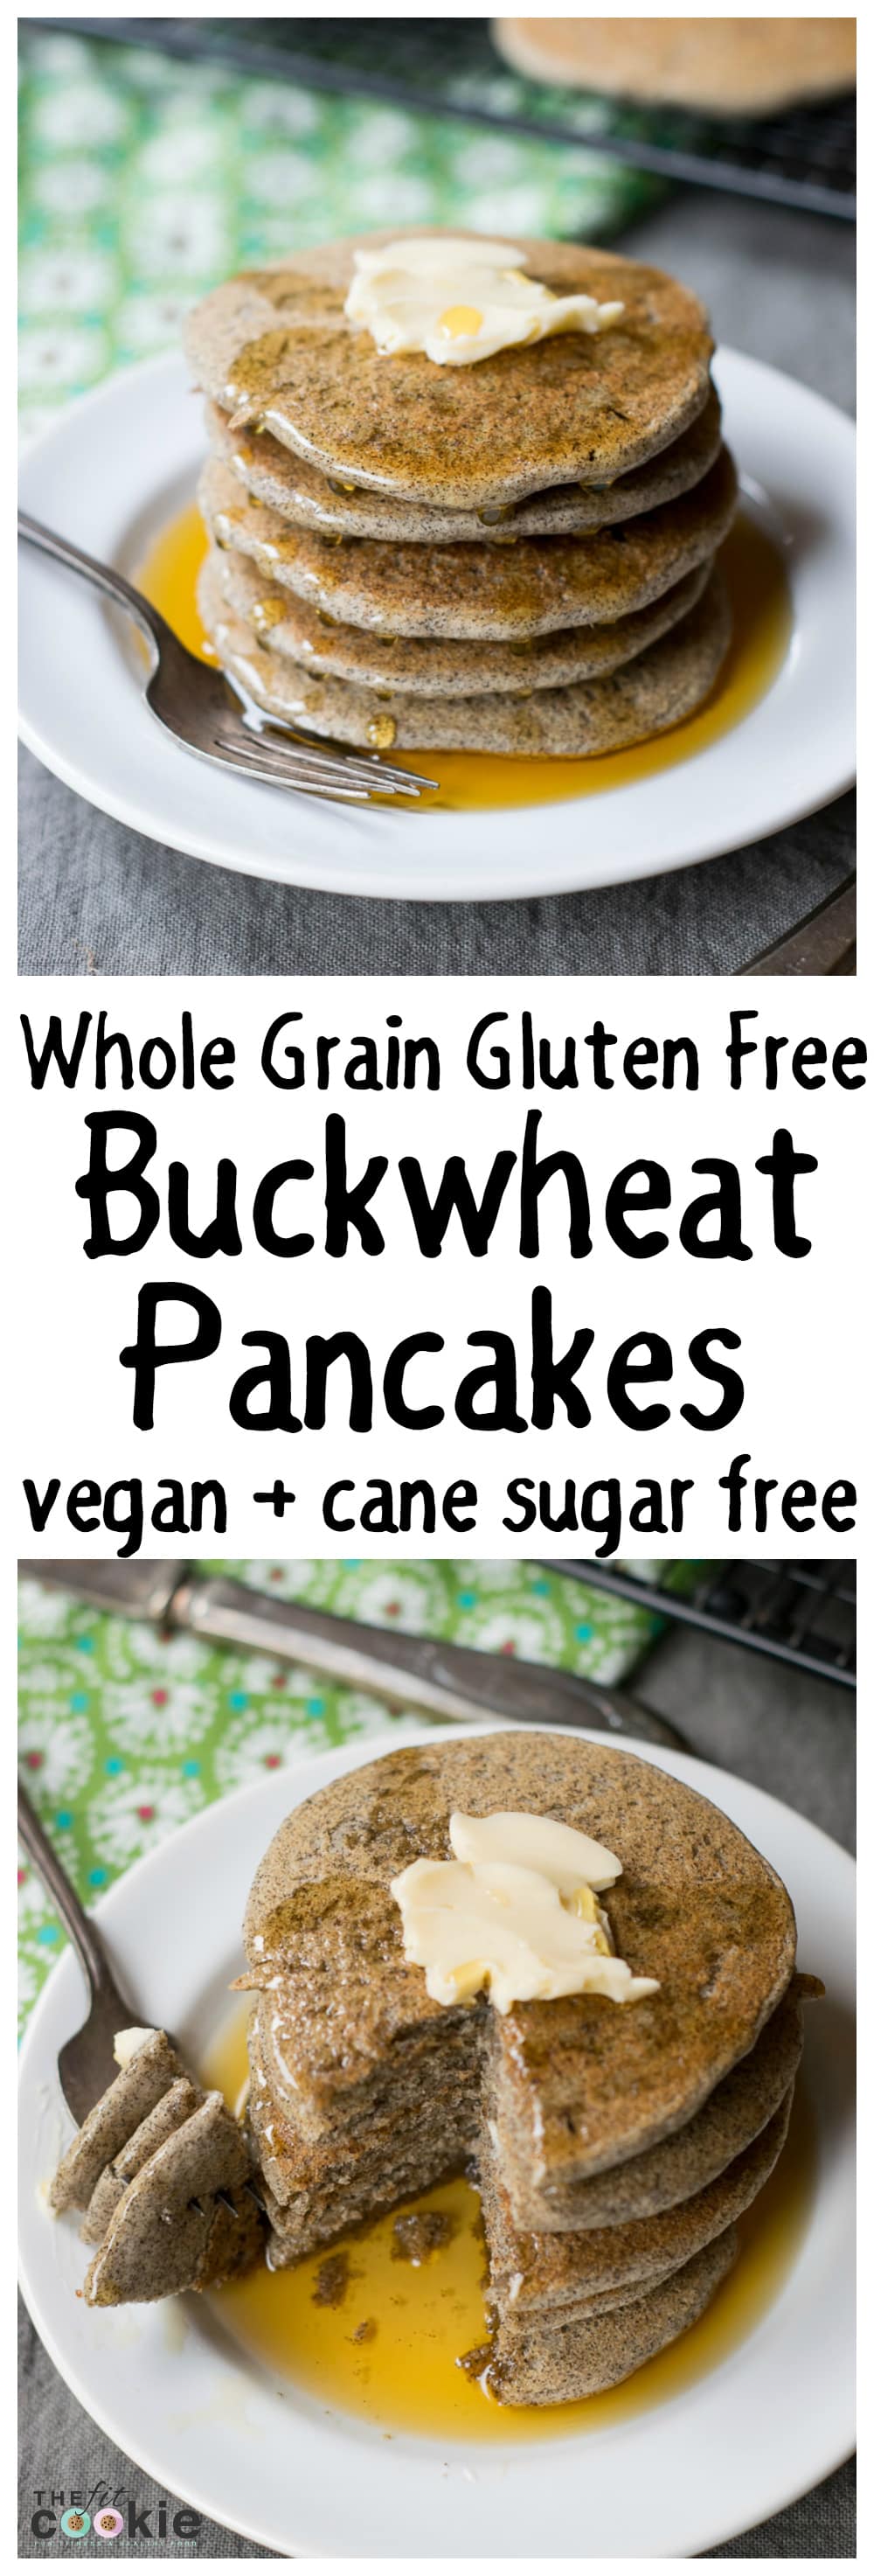 Start breakfast off right with these delicious and easy Whole Grain Gluten Free Buckwheat Pancakes (they're vegan too!). They are also free of cane sugar and can be made completely sugar-free as well - @TheFitCookie